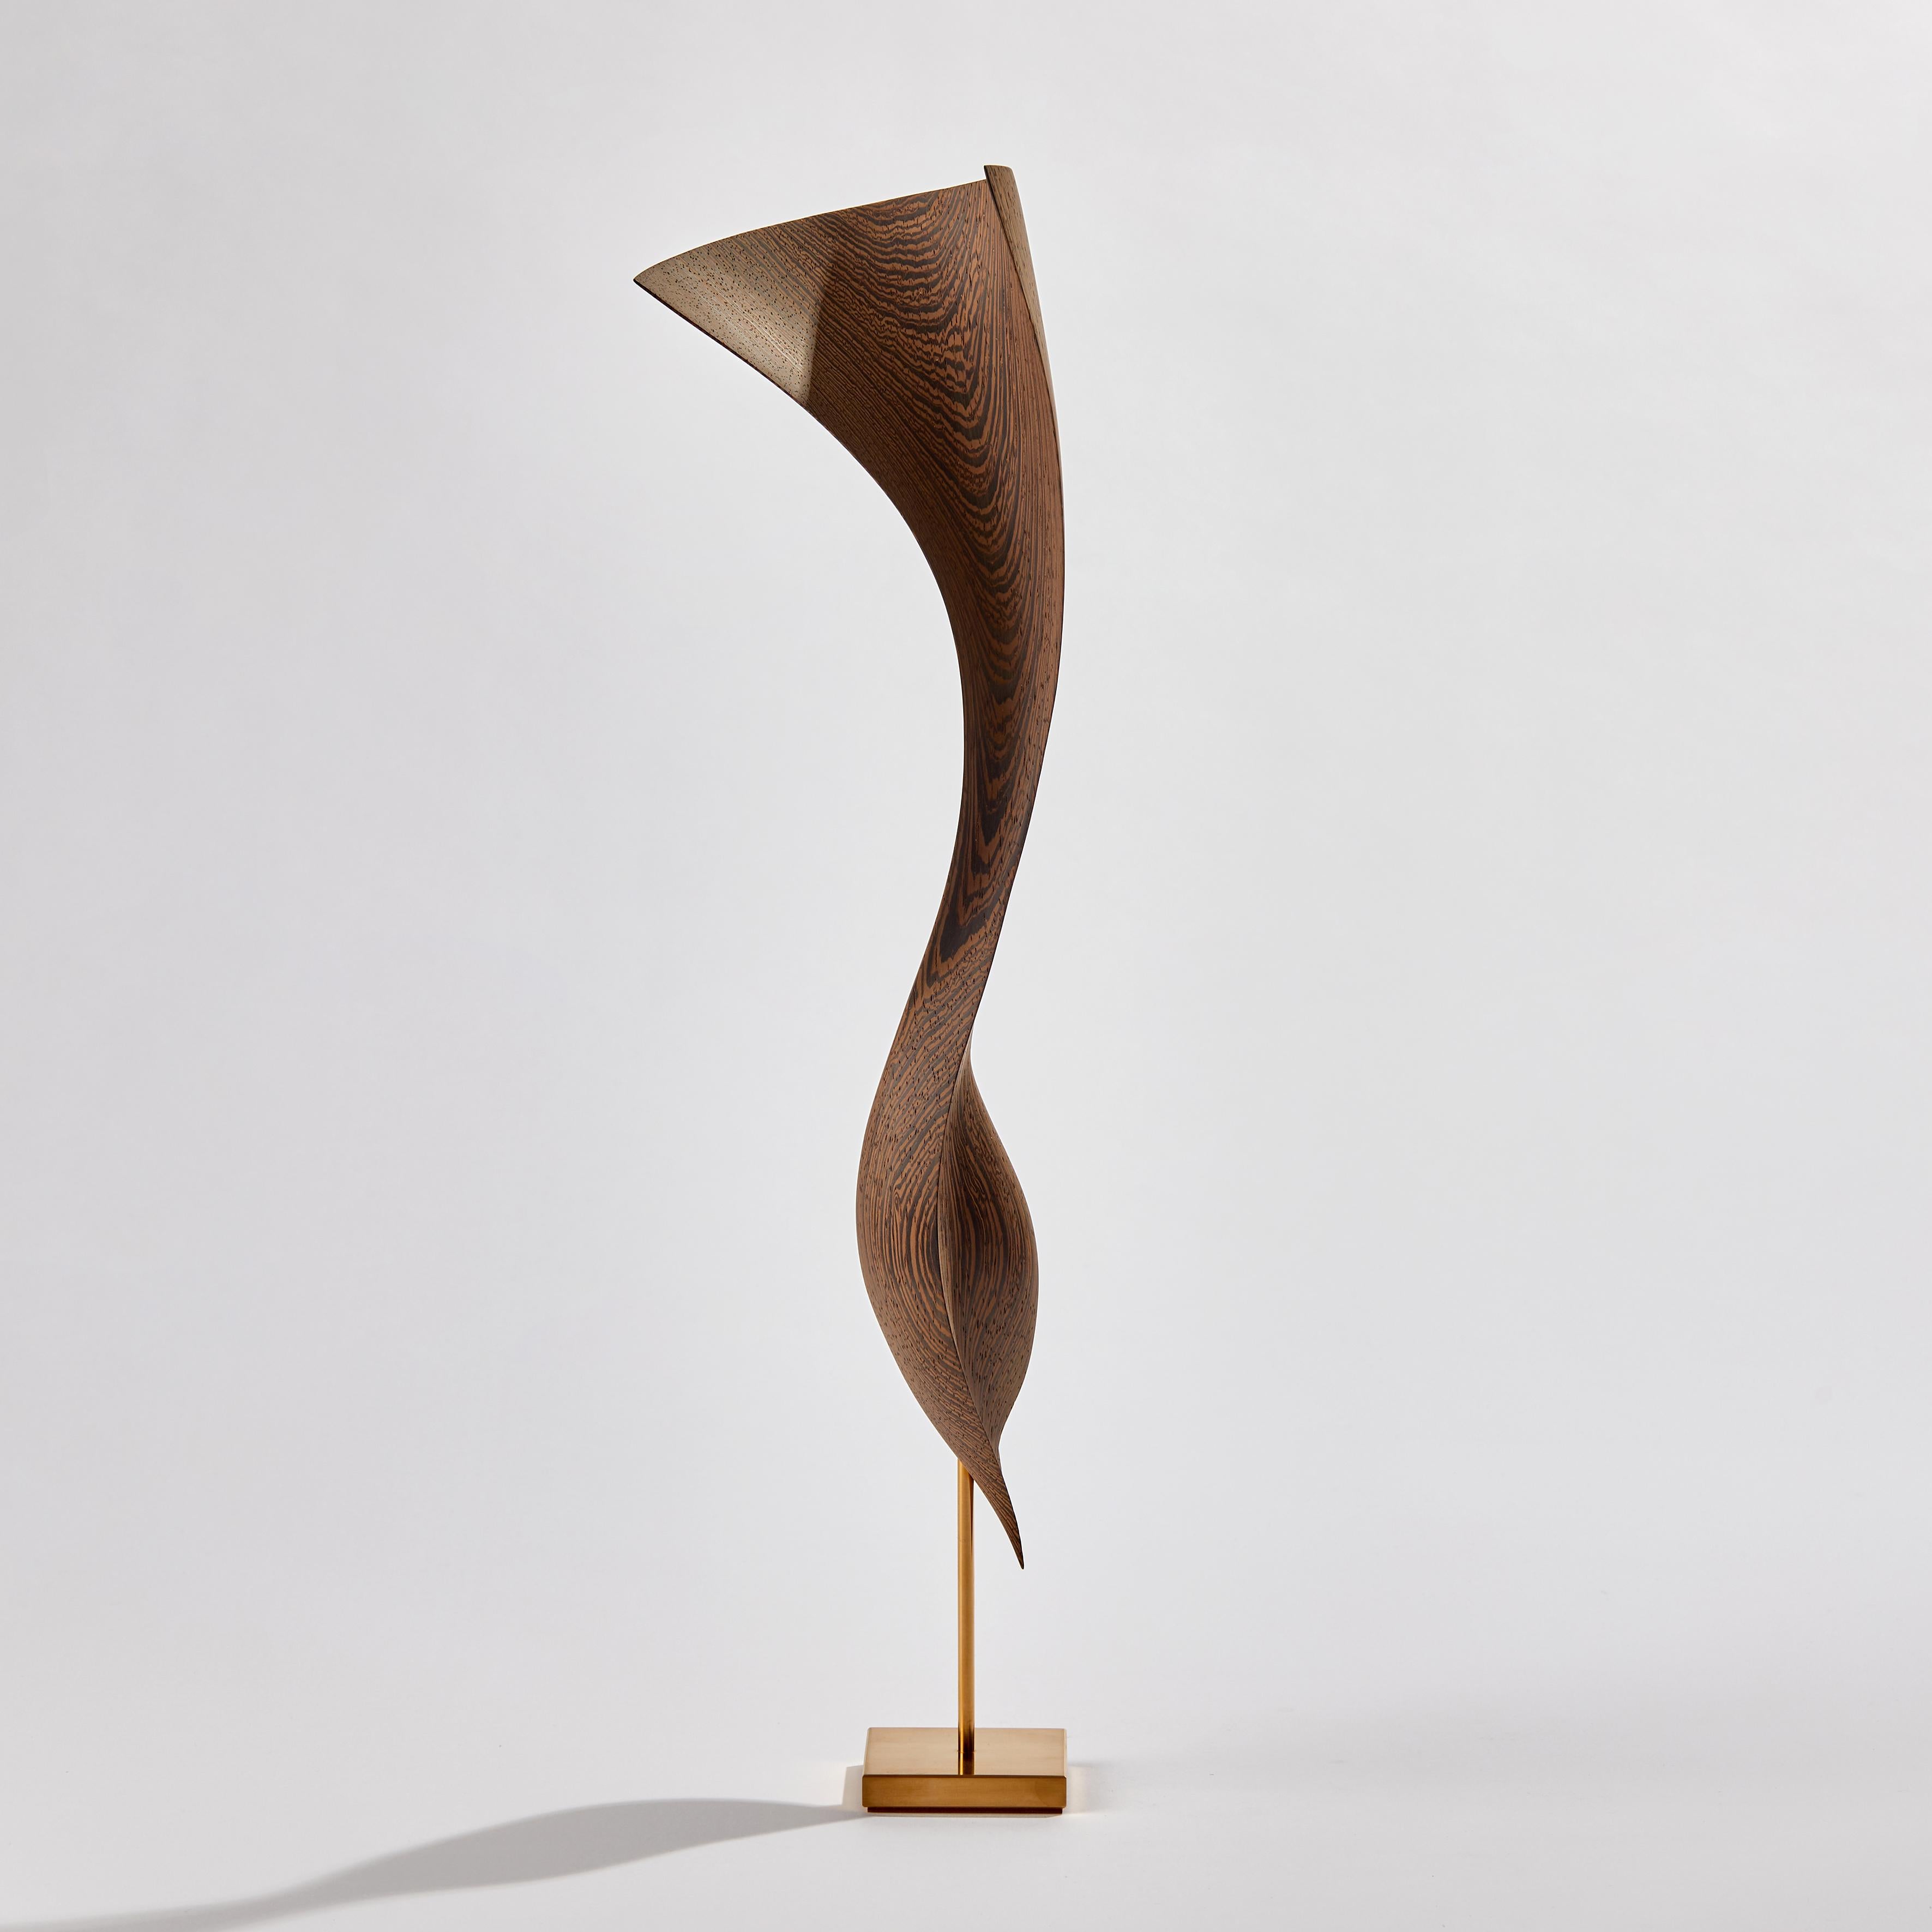 Flow Petit No 9 is a unique handcrafted sculpture by the Danish artists, Egeværk. Created from Wengé sourced from Africa - Congo and Cameroon - (wood, FSC* certified) with an inlay of 24ct fine gold and gold plated stainless steel foot. Signed on